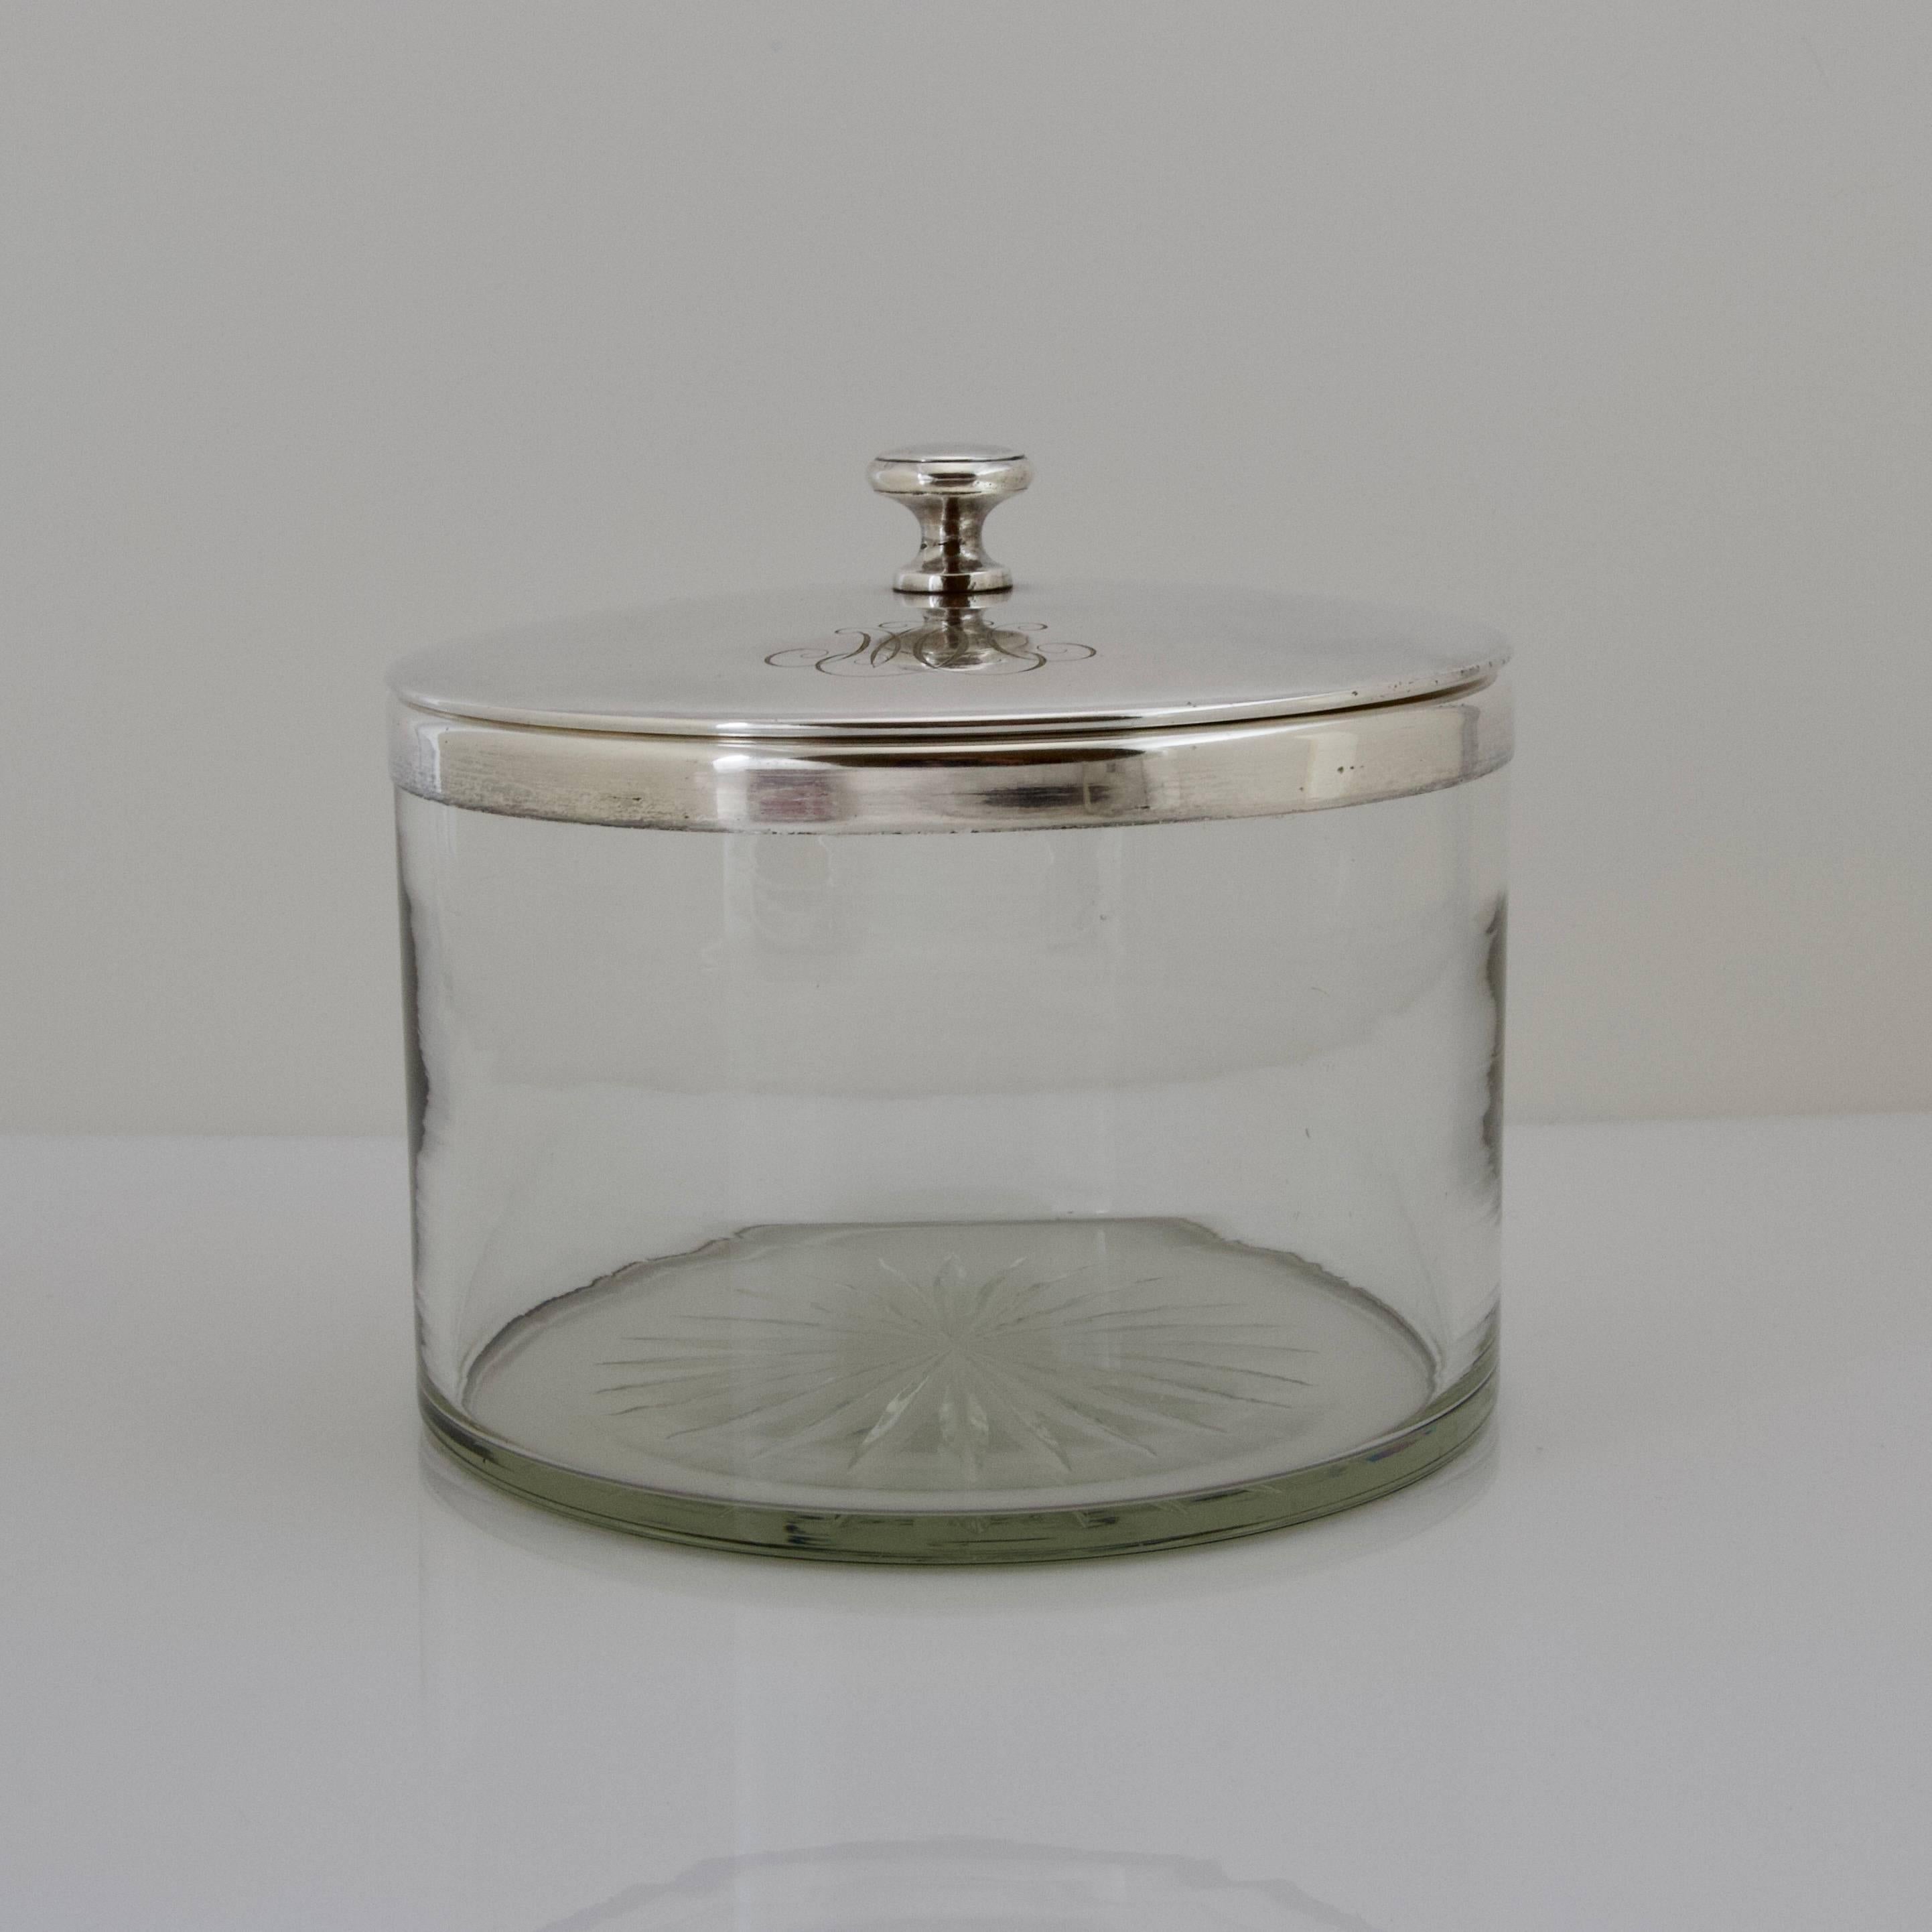 A large caviar bowl in two parts, a glass round bowl, for ice, circled by silver plated frame with two handles containing a bowl for caviar and its cover ciphered MH resting on a brace base. 
Each bottom is engraved with a rosette.
Capacity: 2